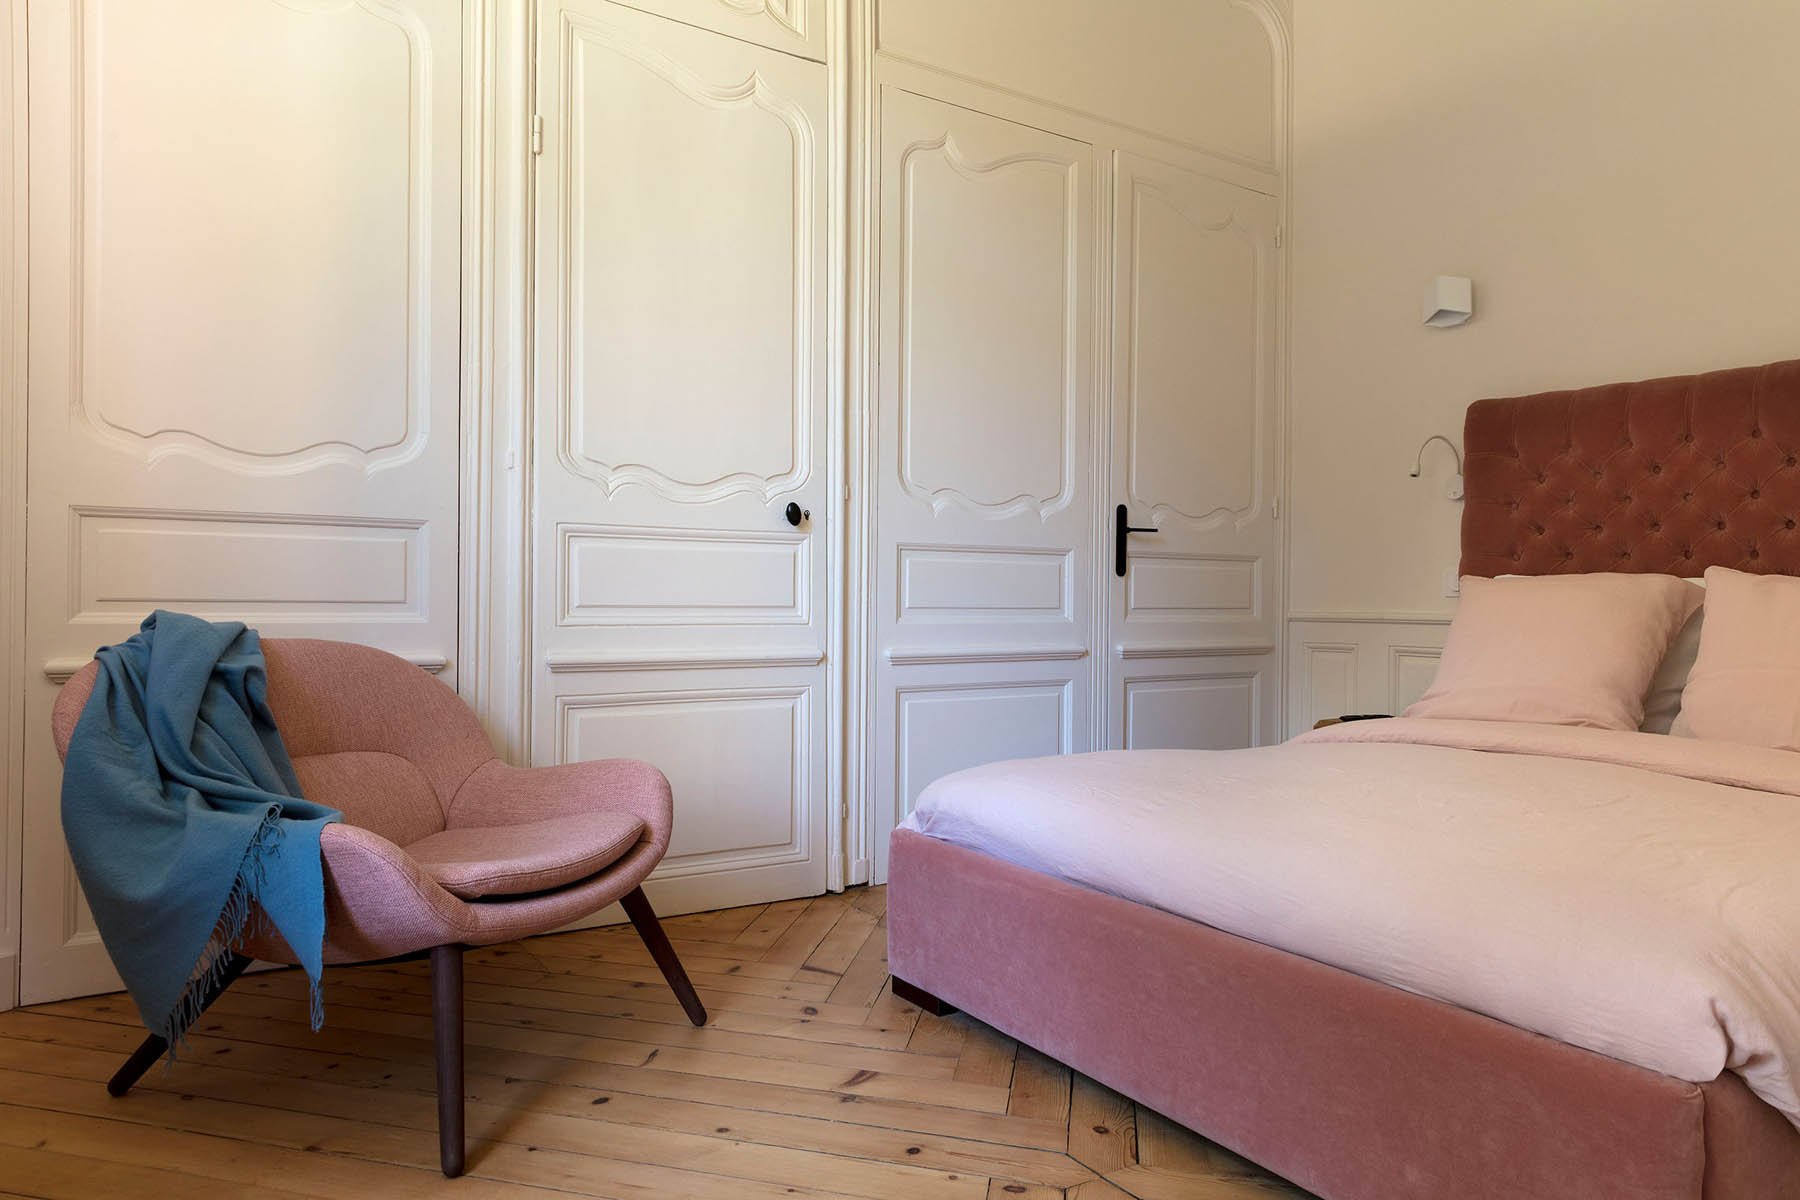 22/Chambres/PLUME/chambre_plume.jpg